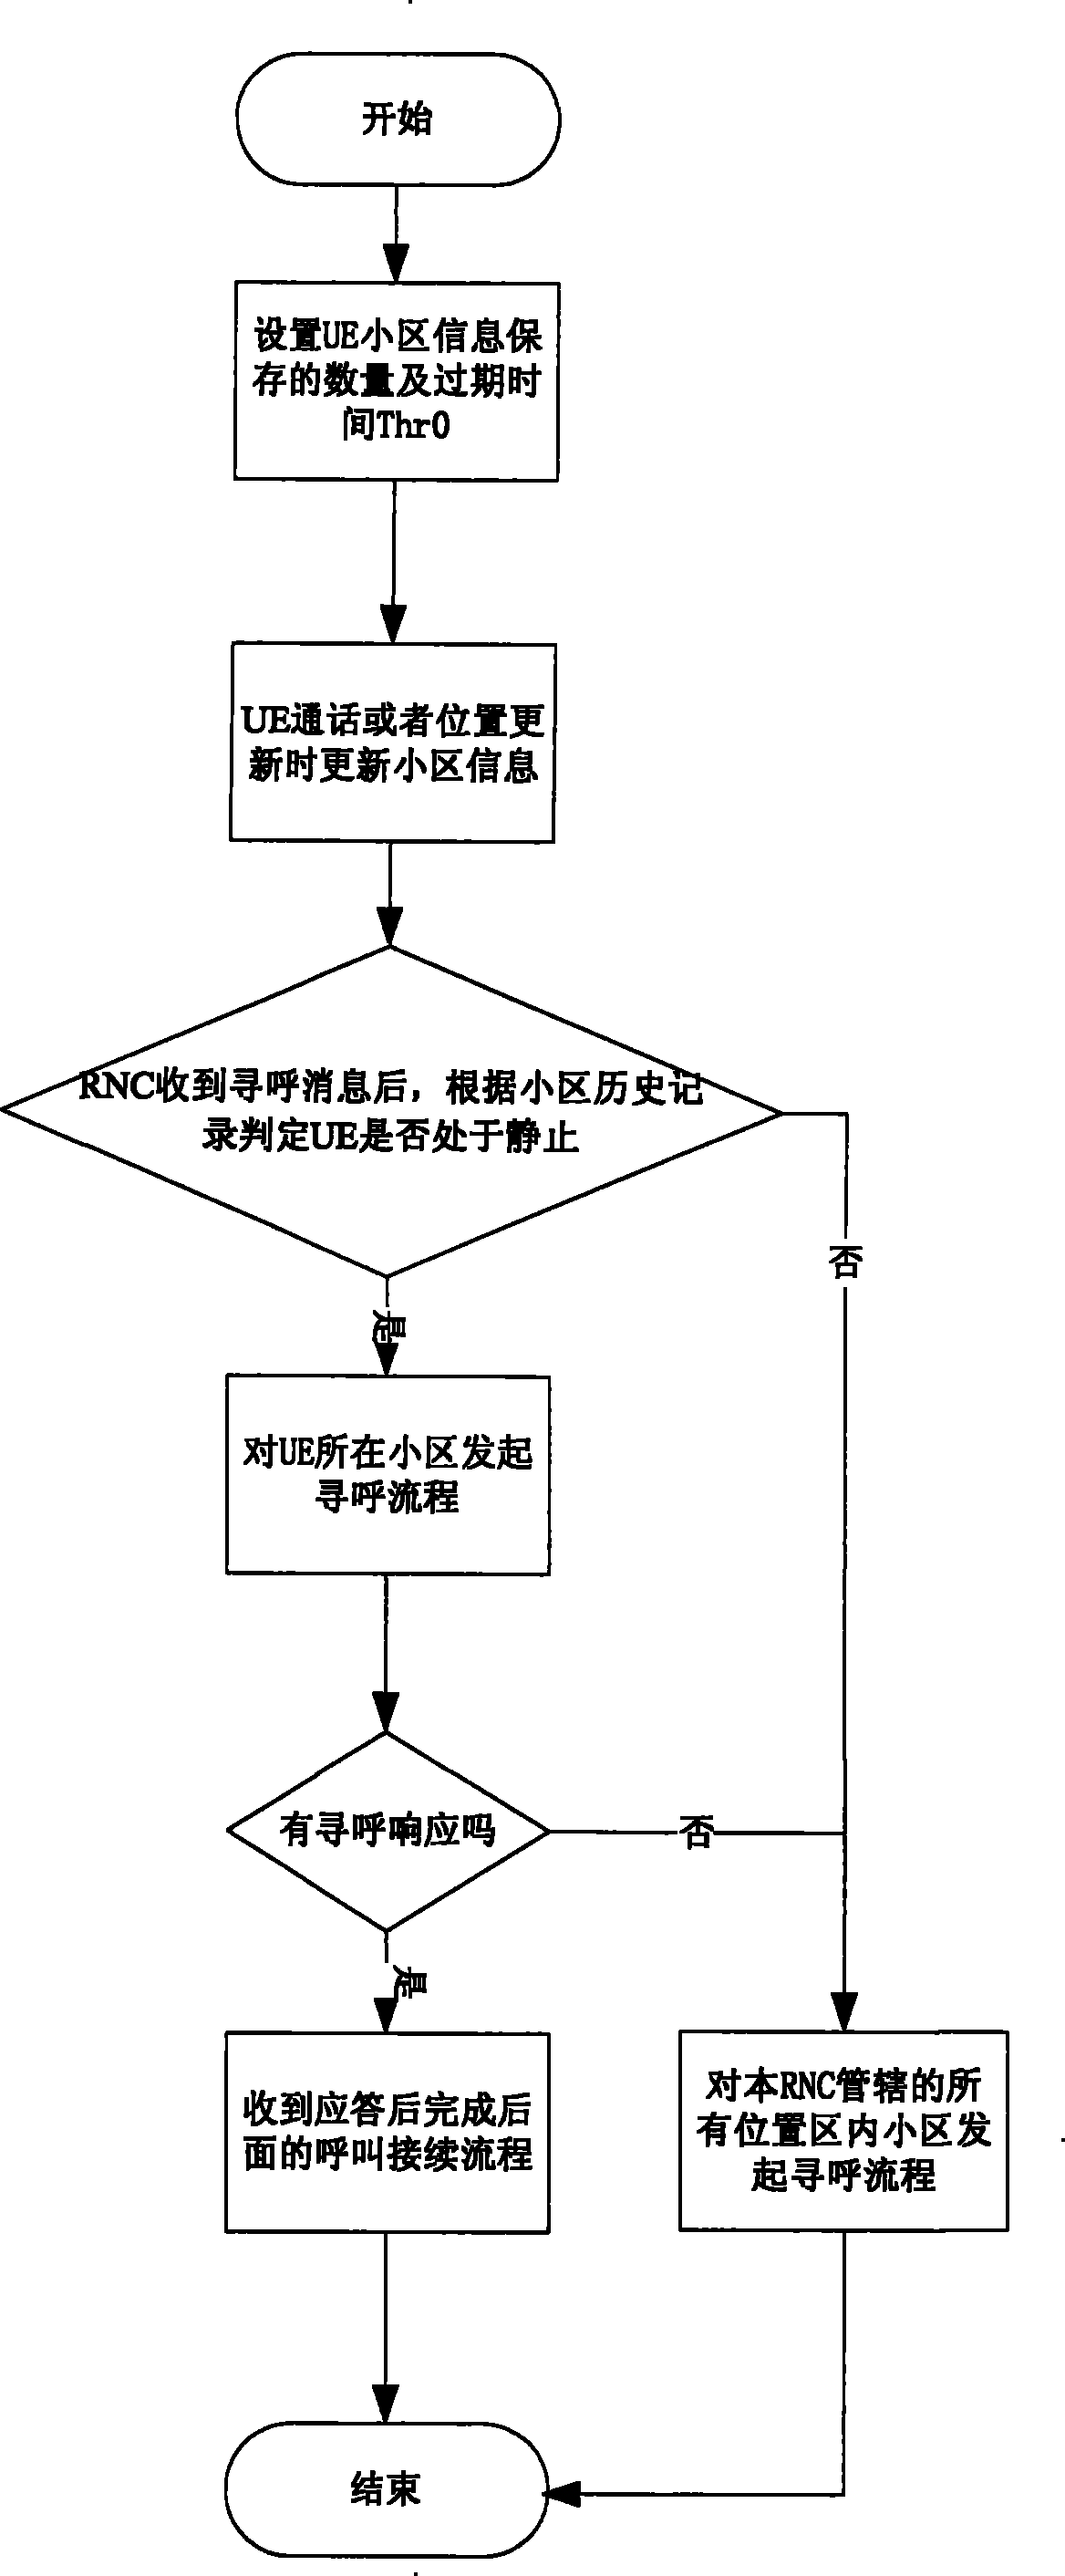 Method for paging user terminal in a radio communication system